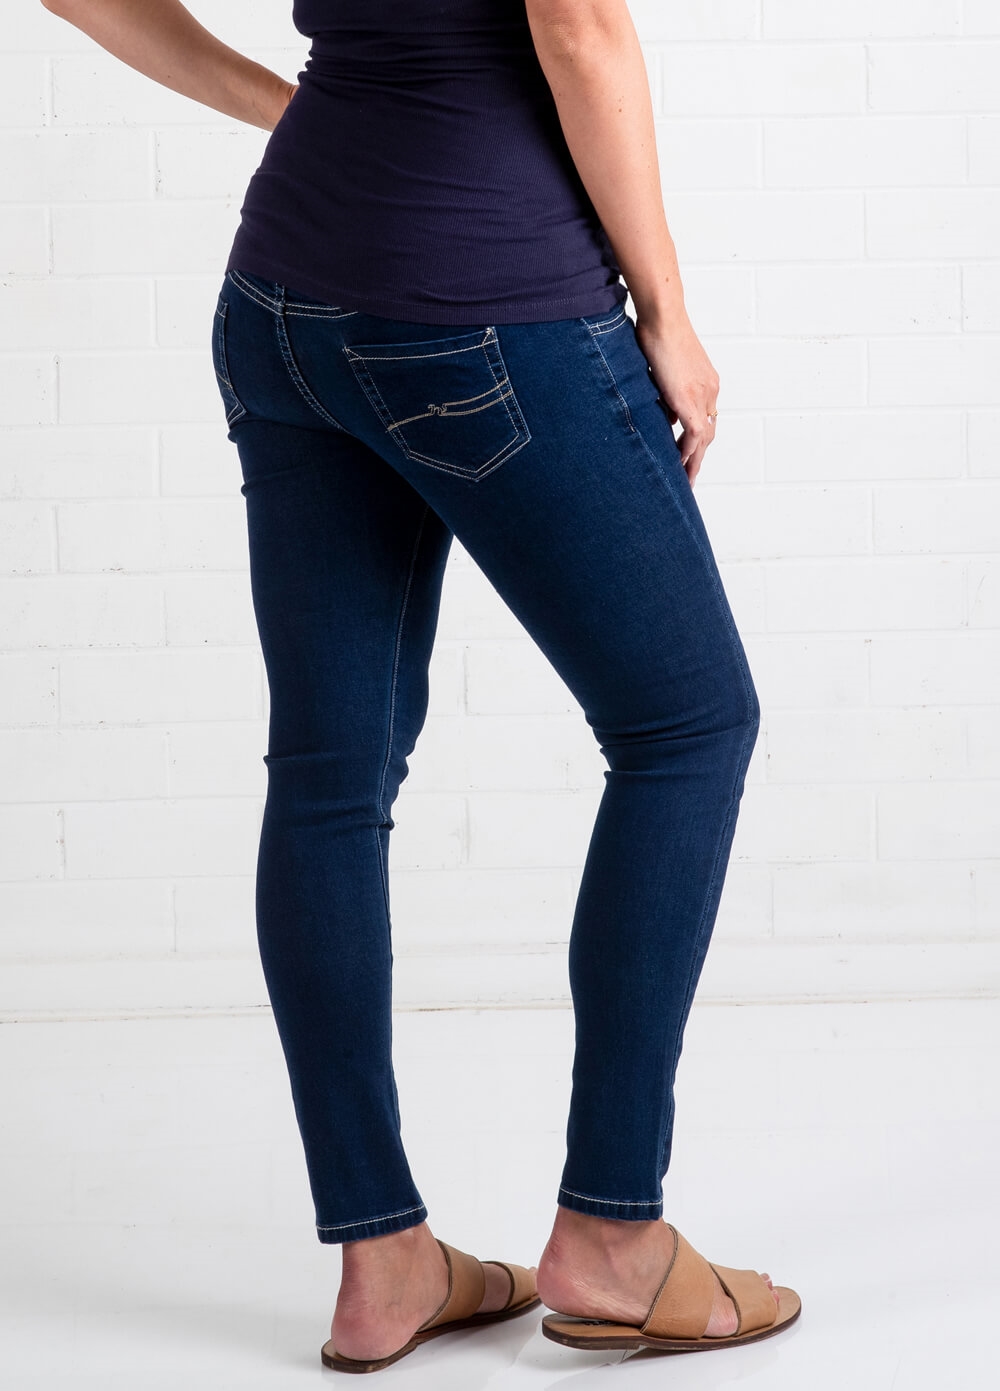 Lait & Co - Christophe Ankle Maternity Jeans in Blue | Queen Bee